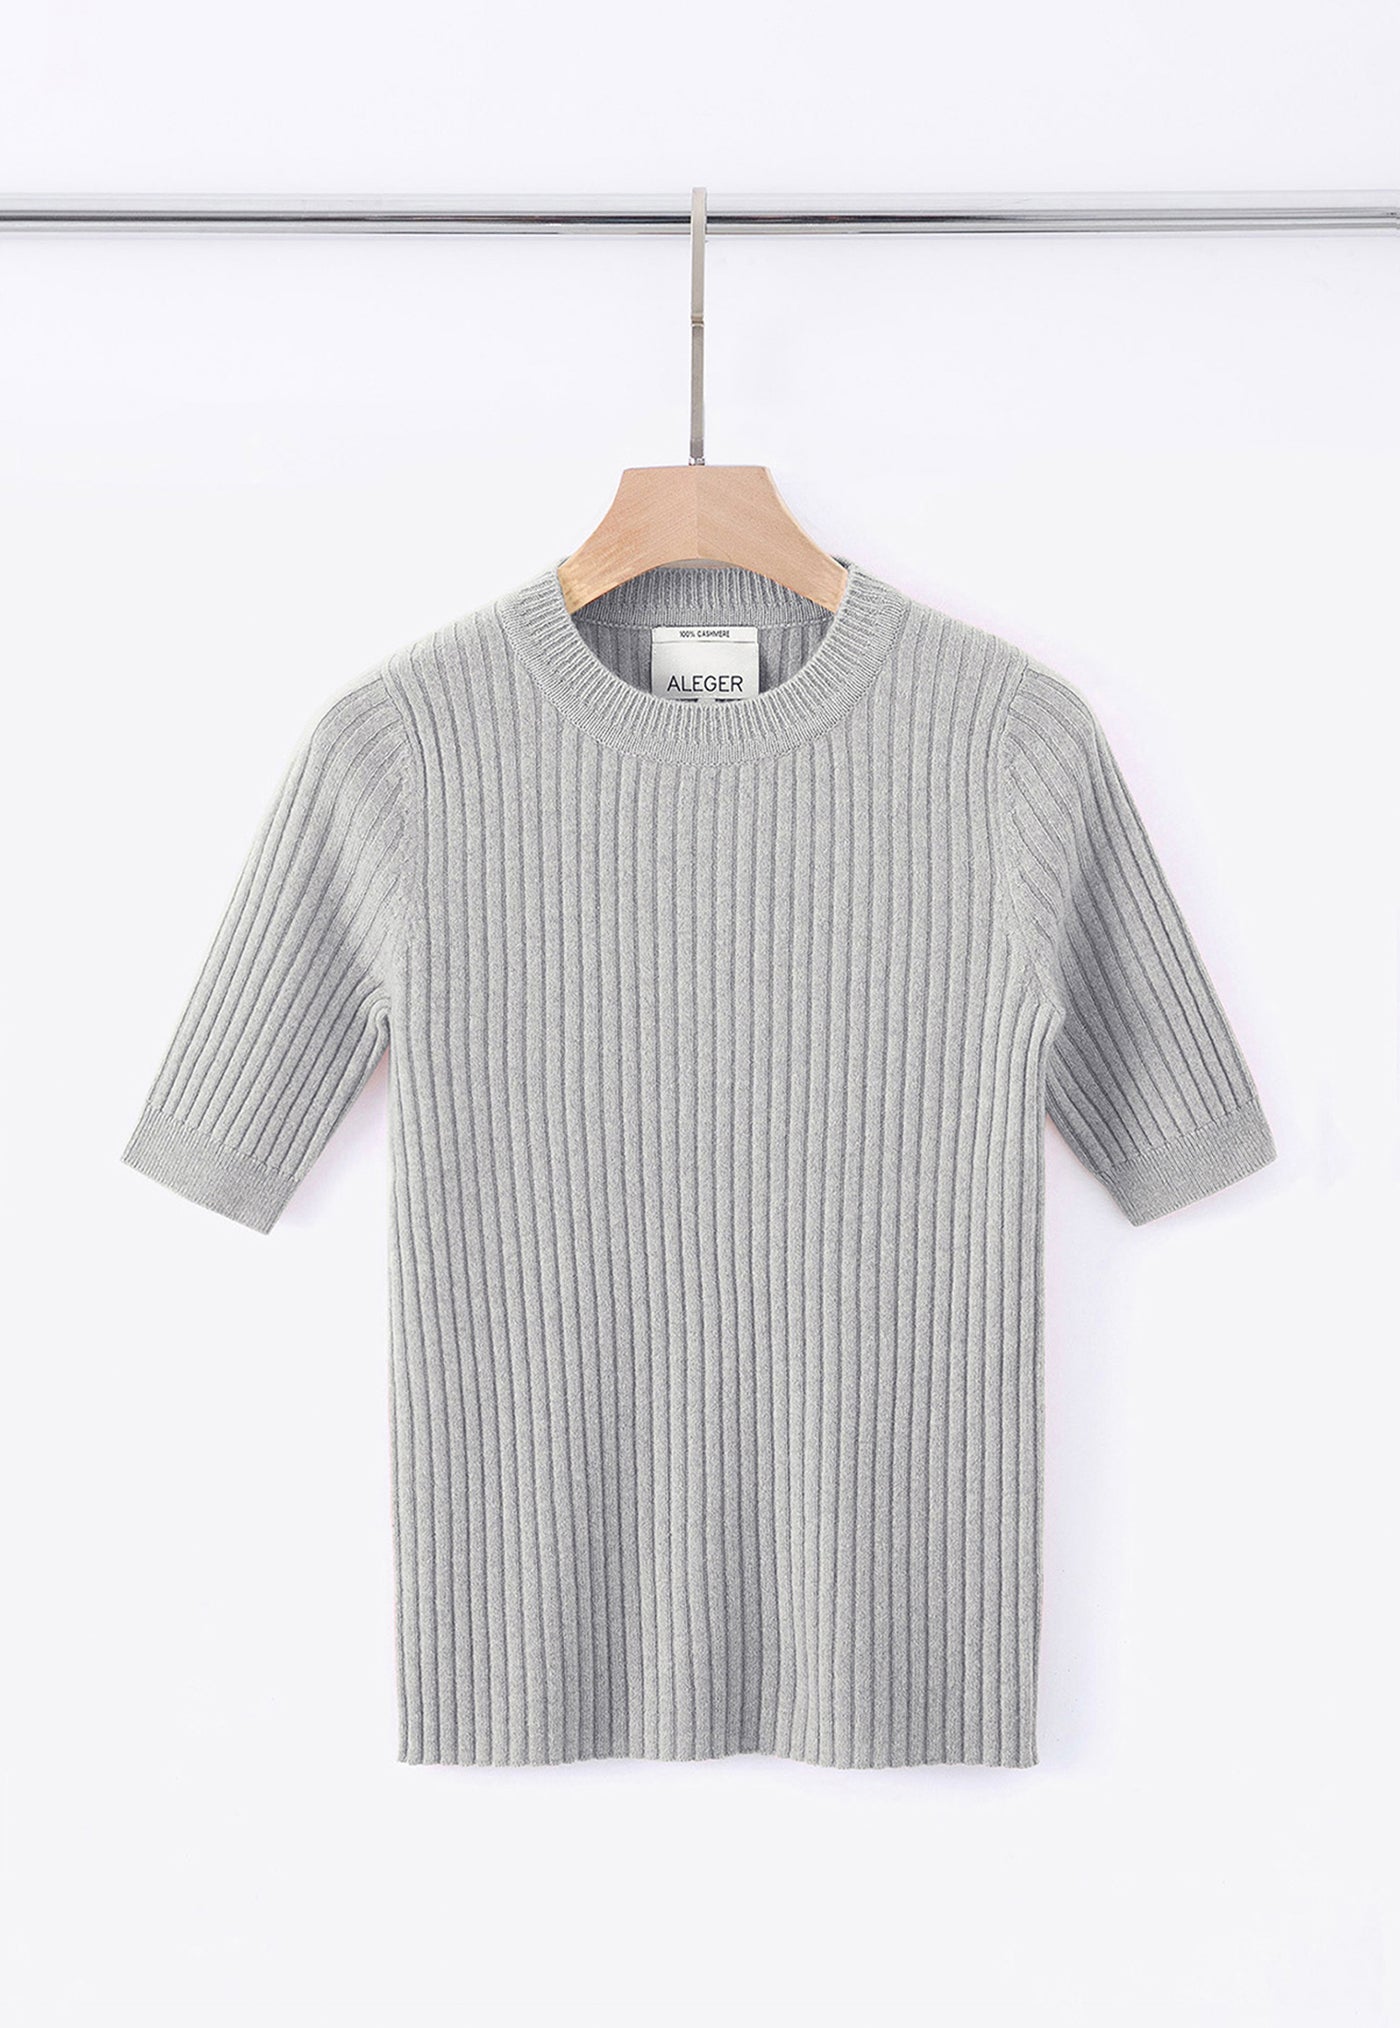 N.48 Cashmere Short Sleeve Tee - Polar Grey sold by Angel Divine